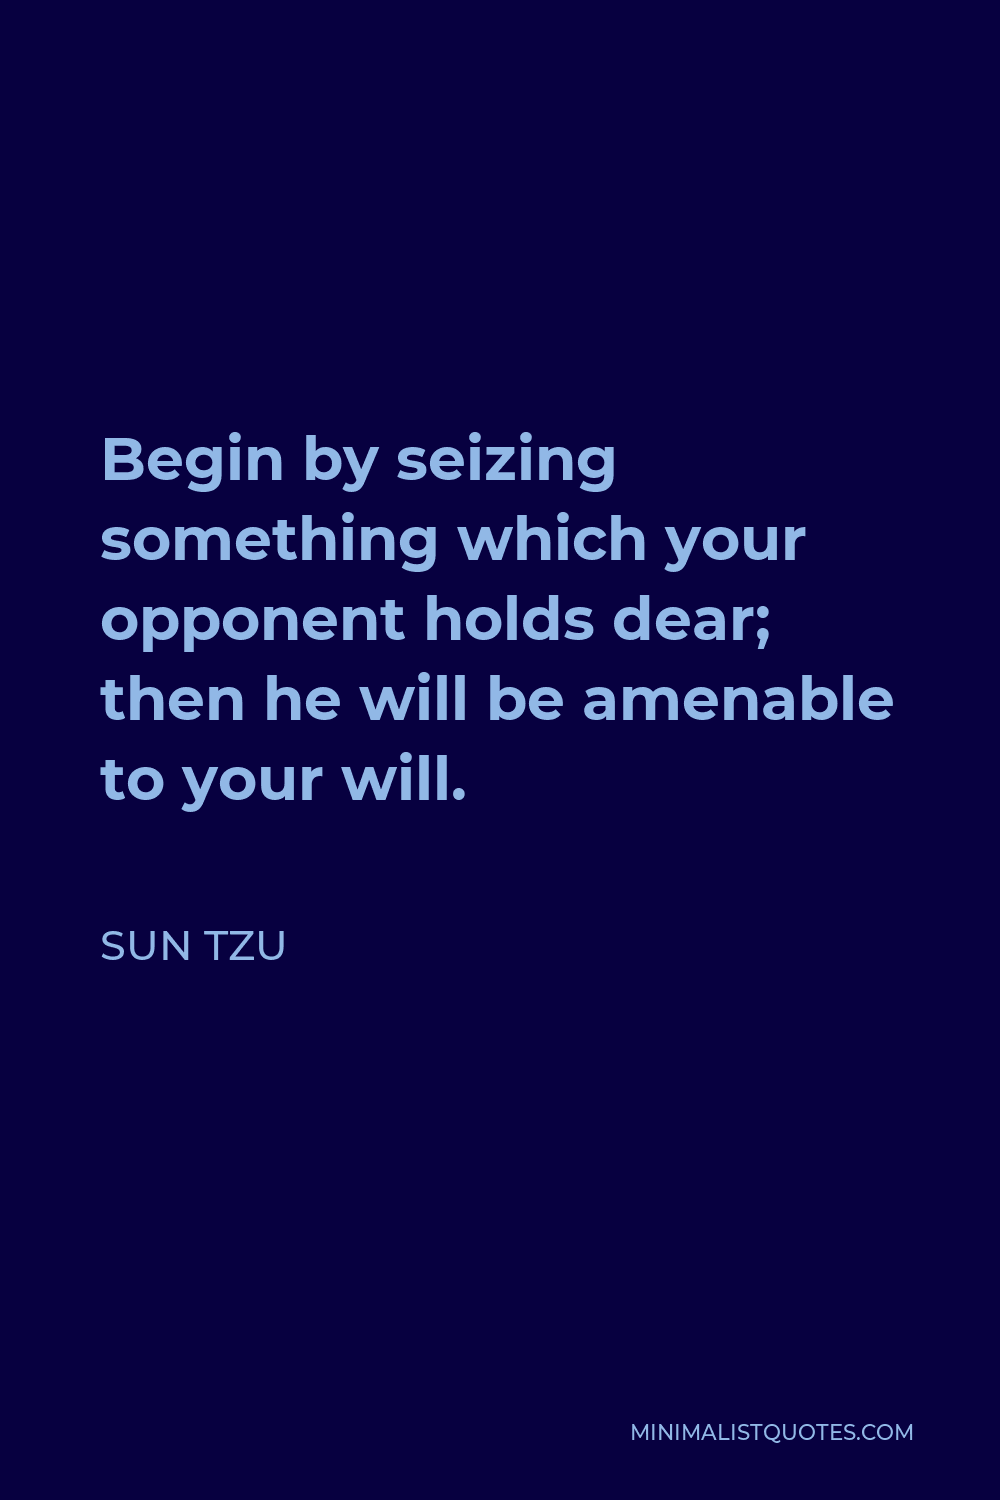 Sun Tzu Quote - Begin by seizing something which your opponent holds dear; then he will be amenable to your will.